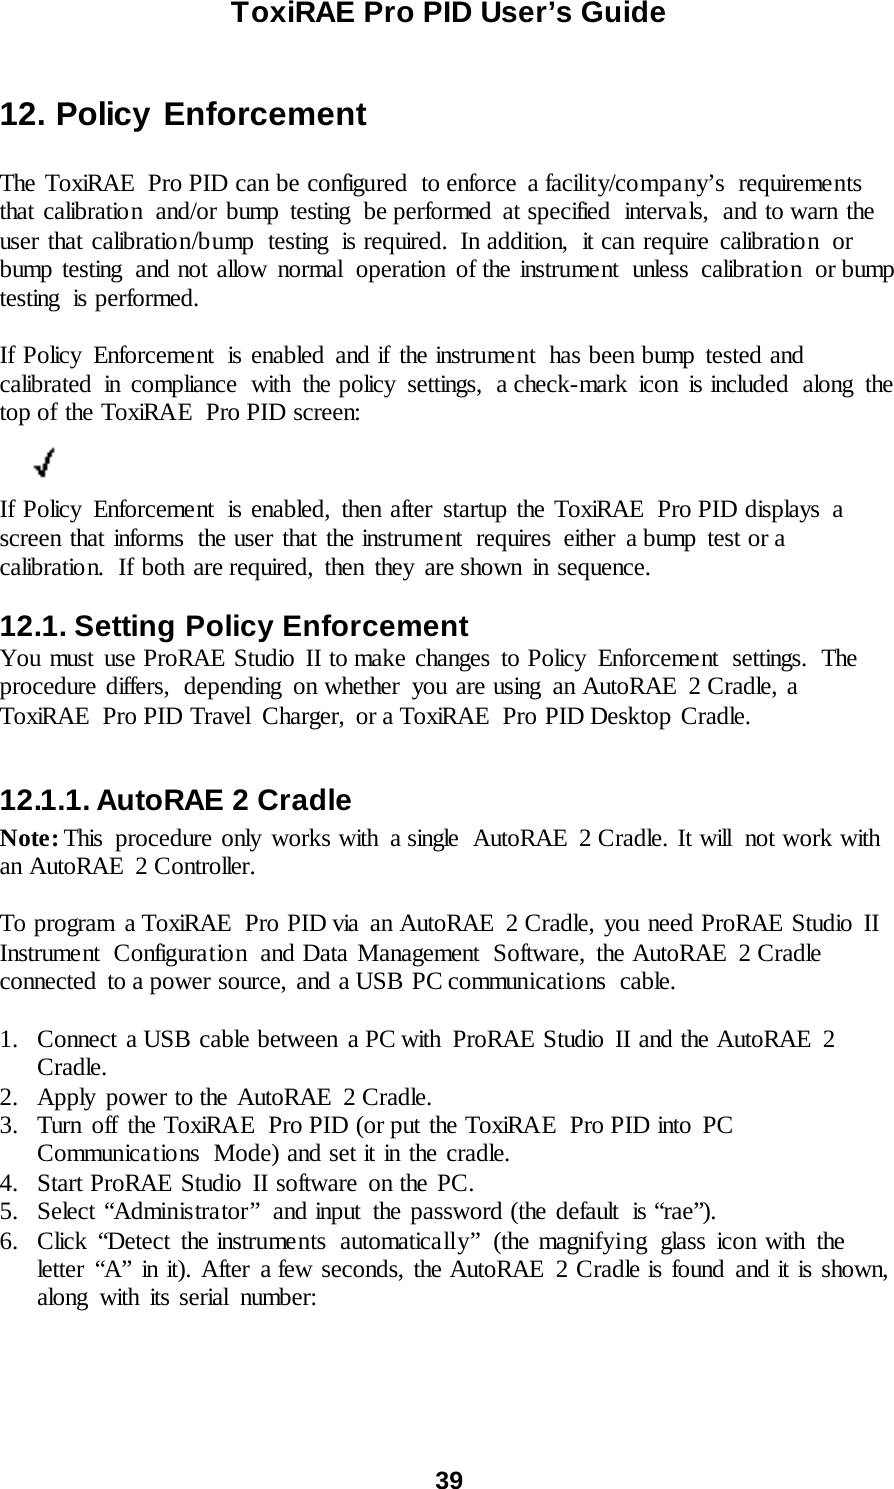 ToxiRAE Pro PID User’s Guide  39   12. Policy Enforcement  The ToxiRAE  Pro PID can be configured  to enforce  a facility/company’s  requirements that calibration and/or bump testing be performed at specified intervals, and to warn the user that calibration/bump  testing  is required.  In addition,  it can require calibration or bump testing and not allow normal operation of the instrument unless calibration or bump testing  is performed.  If Policy  Enforcement  is enabled and if the instrument  has been bump tested and calibrated in compliance with the policy settings, a check-mark icon is included along the top of the ToxiRAE  Pro PID screen:          If Policy Enforcement  is enabled, then after startup the ToxiRAE  Pro PID displays a screen that informs  the user that the instrument  requires either a bump test or a calibration. If both are required, then they are shown in sequence.  12.1. Setting Policy Enforcement You must use ProRAE Studio II to make changes to Policy  Enforcement  settings.  The procedure differs, depending on whether you are using an AutoRAE 2 Cradle, a ToxiRAE Pro PID Travel  Charger,  or a ToxiRAE  Pro PID Desktop Cradle.  12.1.1. AutoRAE 2 Cradle Note: This  procedure only works with  a single  AutoRAE  2 Cradle. It will  not work with an AutoRAE  2 Controller.  To program a ToxiRAE  Pro PID via an AutoRAE  2 Cradle, you need ProRAE Studio II Instrument Configuration and Data Management Software, the AutoRAE 2 Cradle connected  to a power source, and a USB PC communications  cable.  1. Connect a USB cable between a PC with  ProRAE Studio II and the AutoRAE  2 Cradle. 2. Apply  power to the AutoRAE  2 Cradle. 3. Turn off the ToxiRAE  Pro PID (or put the ToxiRAE  Pro PID into PC Communications  Mode) and set it in the cradle. 4. Start ProRAE Studio II software on the PC. 5. Select “Administrator”  and input  the password (the default  is “rae”). 6. Click “Detect the instruments automatically” (the magnifying glass icon with the letter “A” in it). After a few seconds, the AutoRAE 2 Cradle is found and it is shown, along with its serial number:    